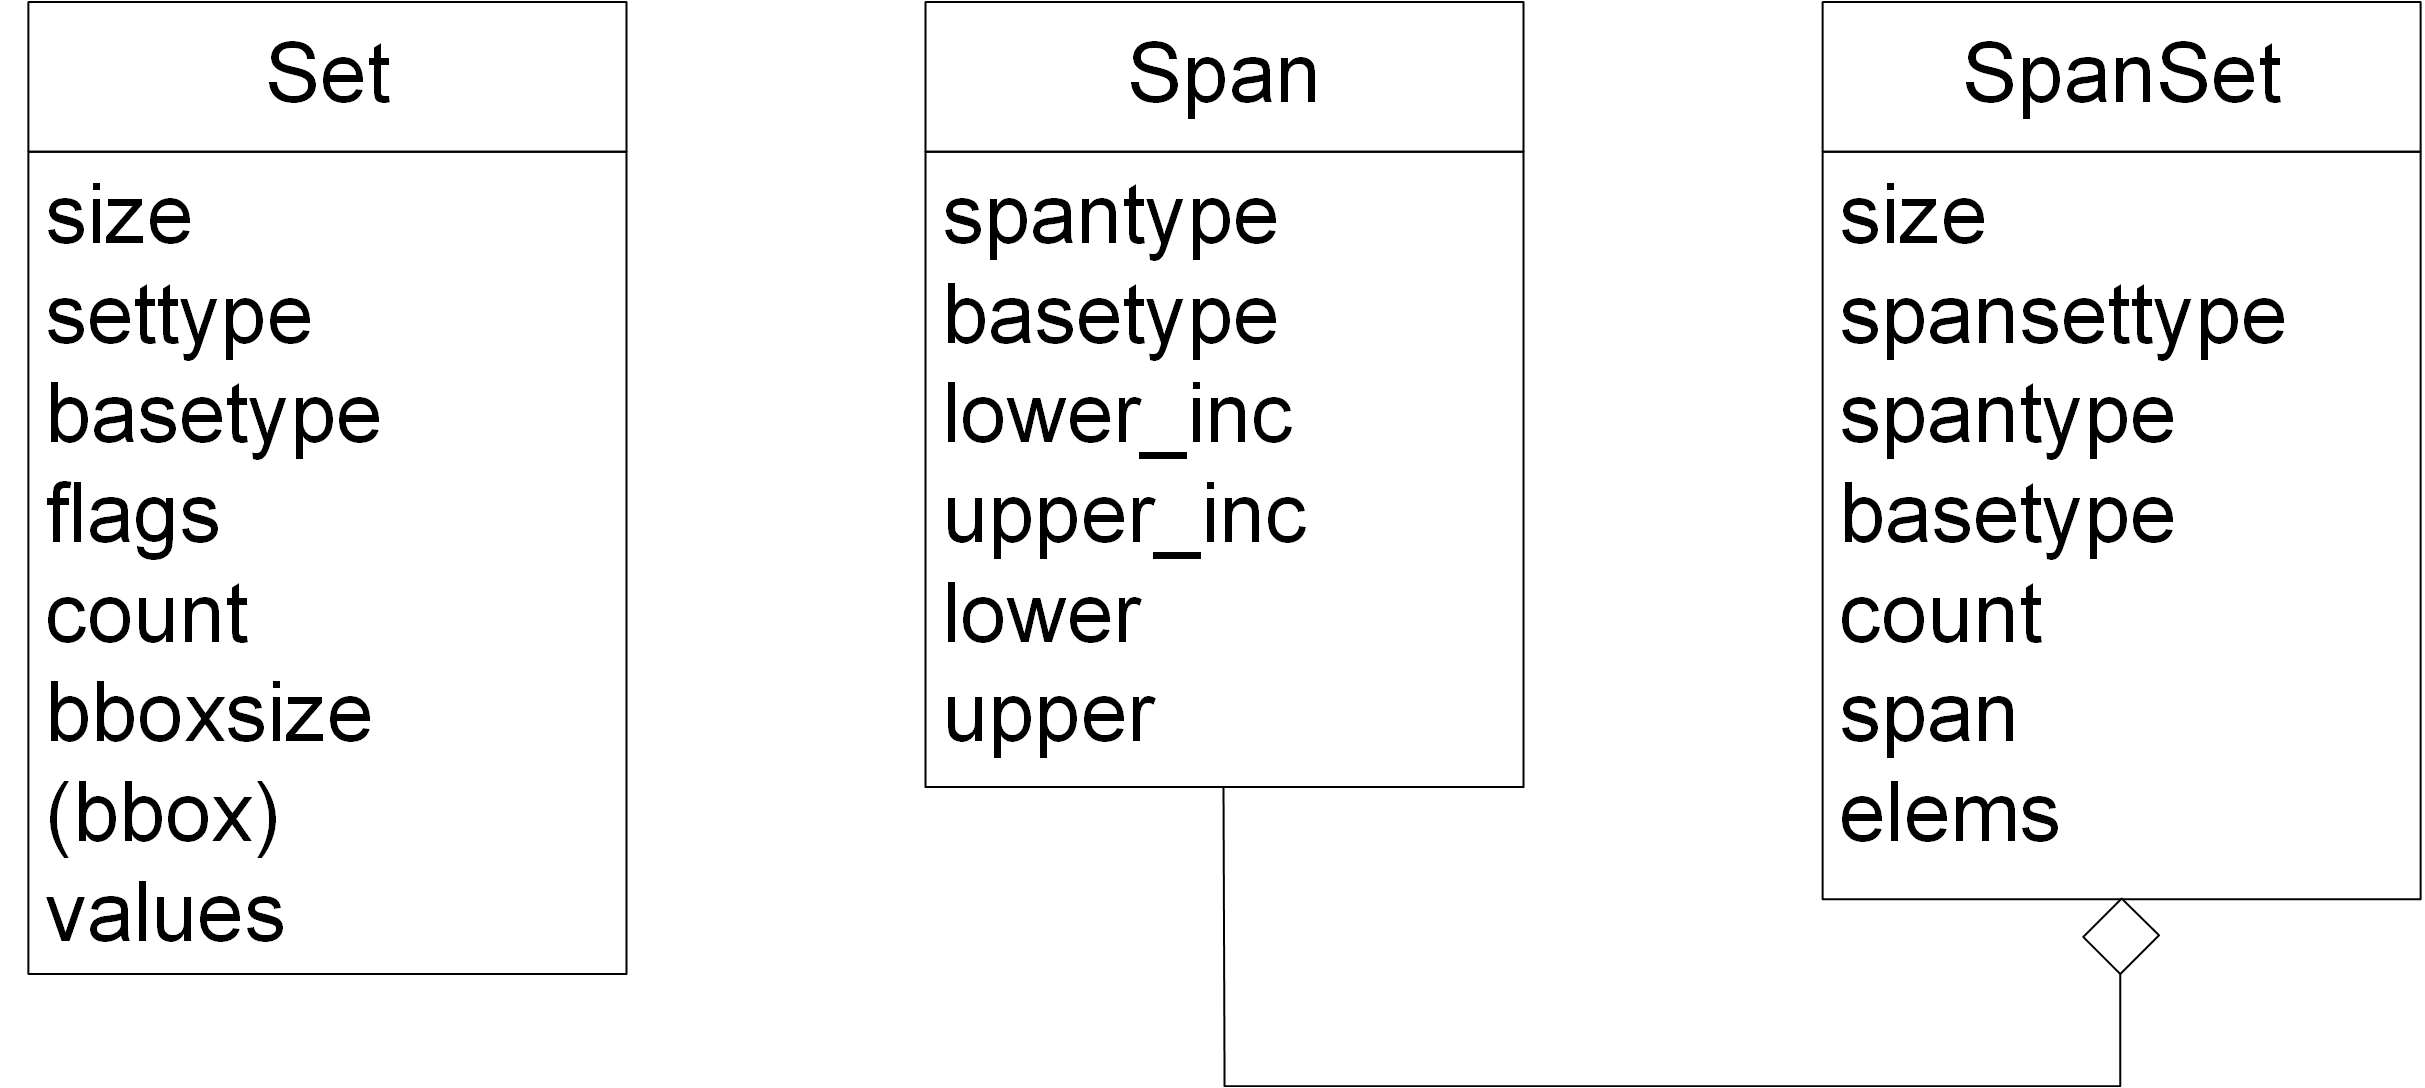 Set and span classes